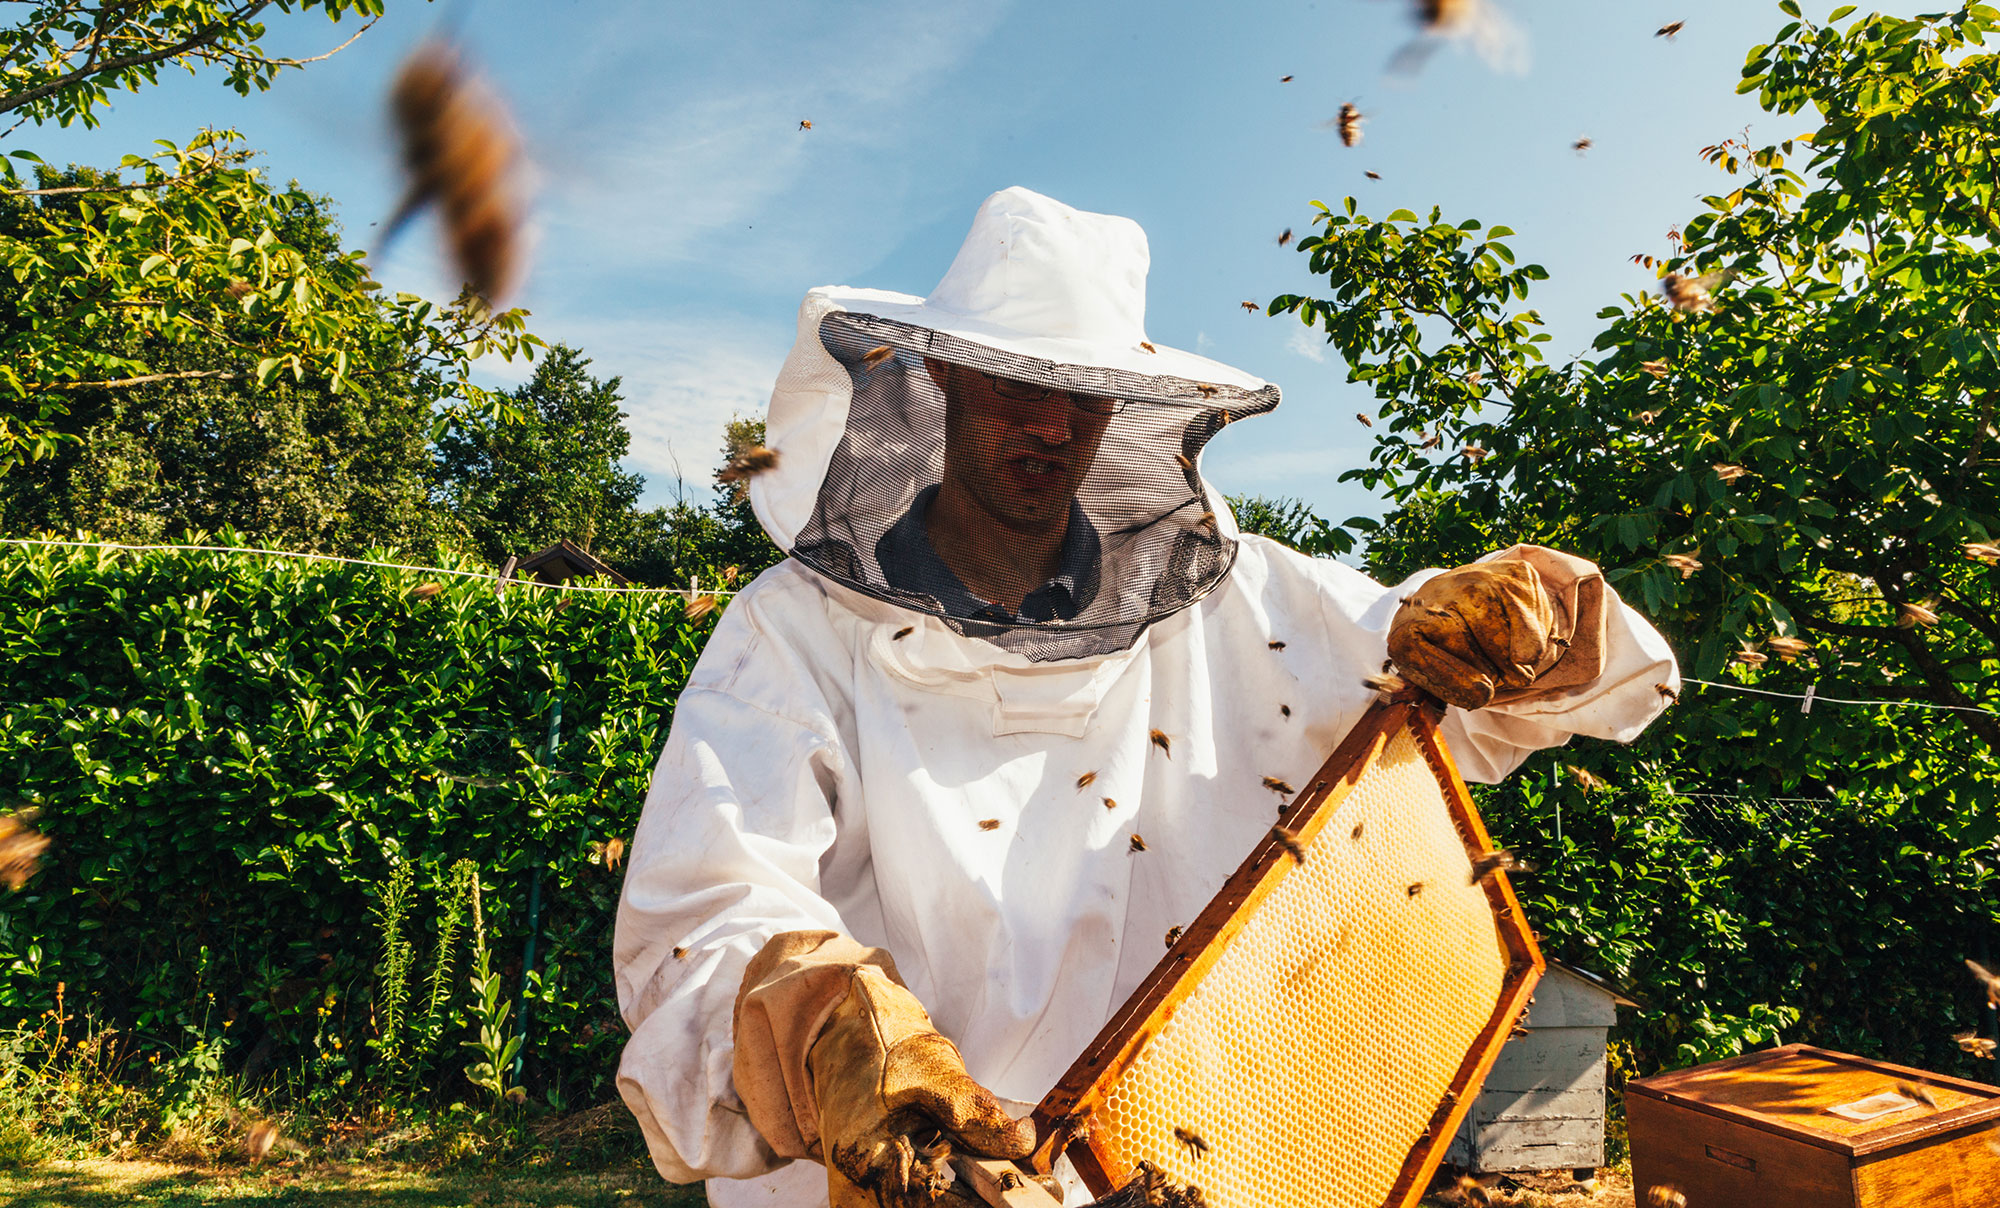 Man surrounded by bees standing in nature holding a frame next to a beehive